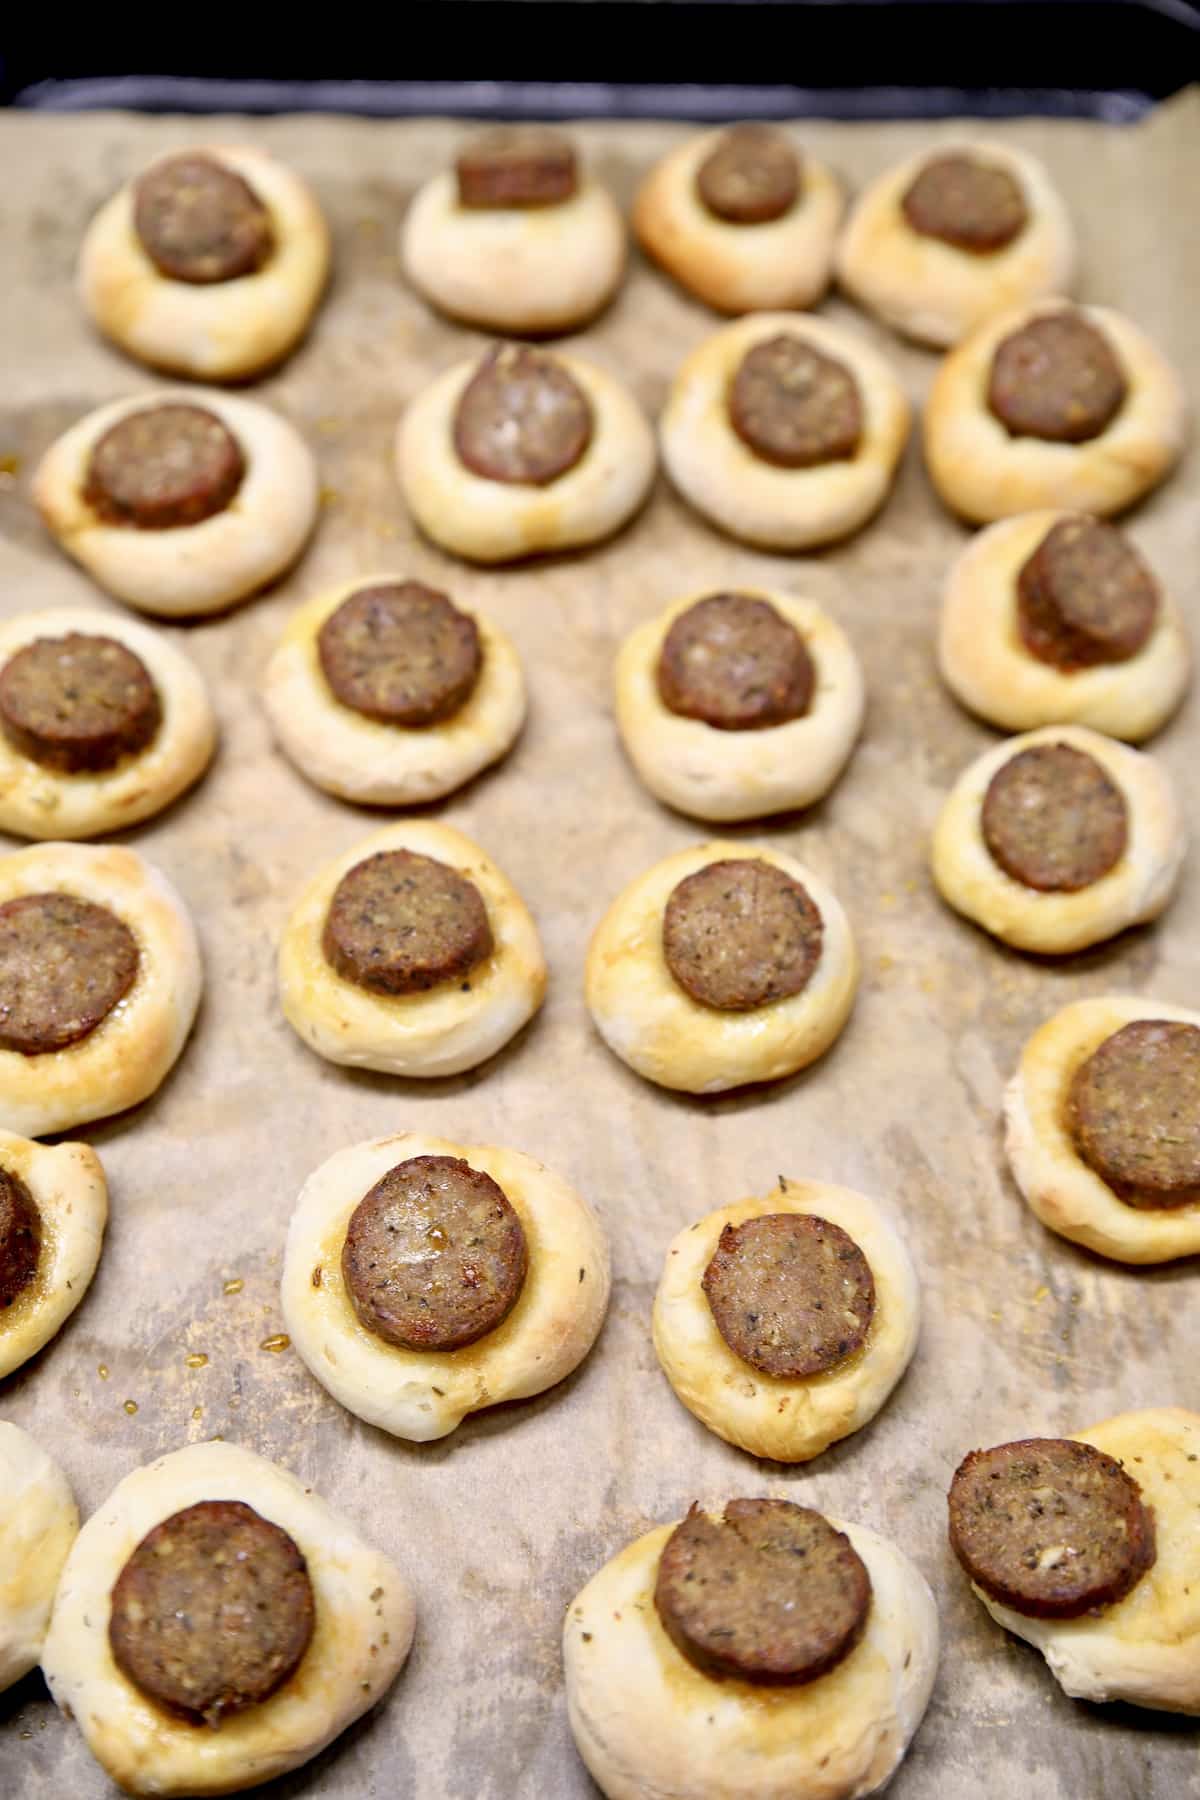 Pizza dough and smoked sausage bites on a baking sheet.